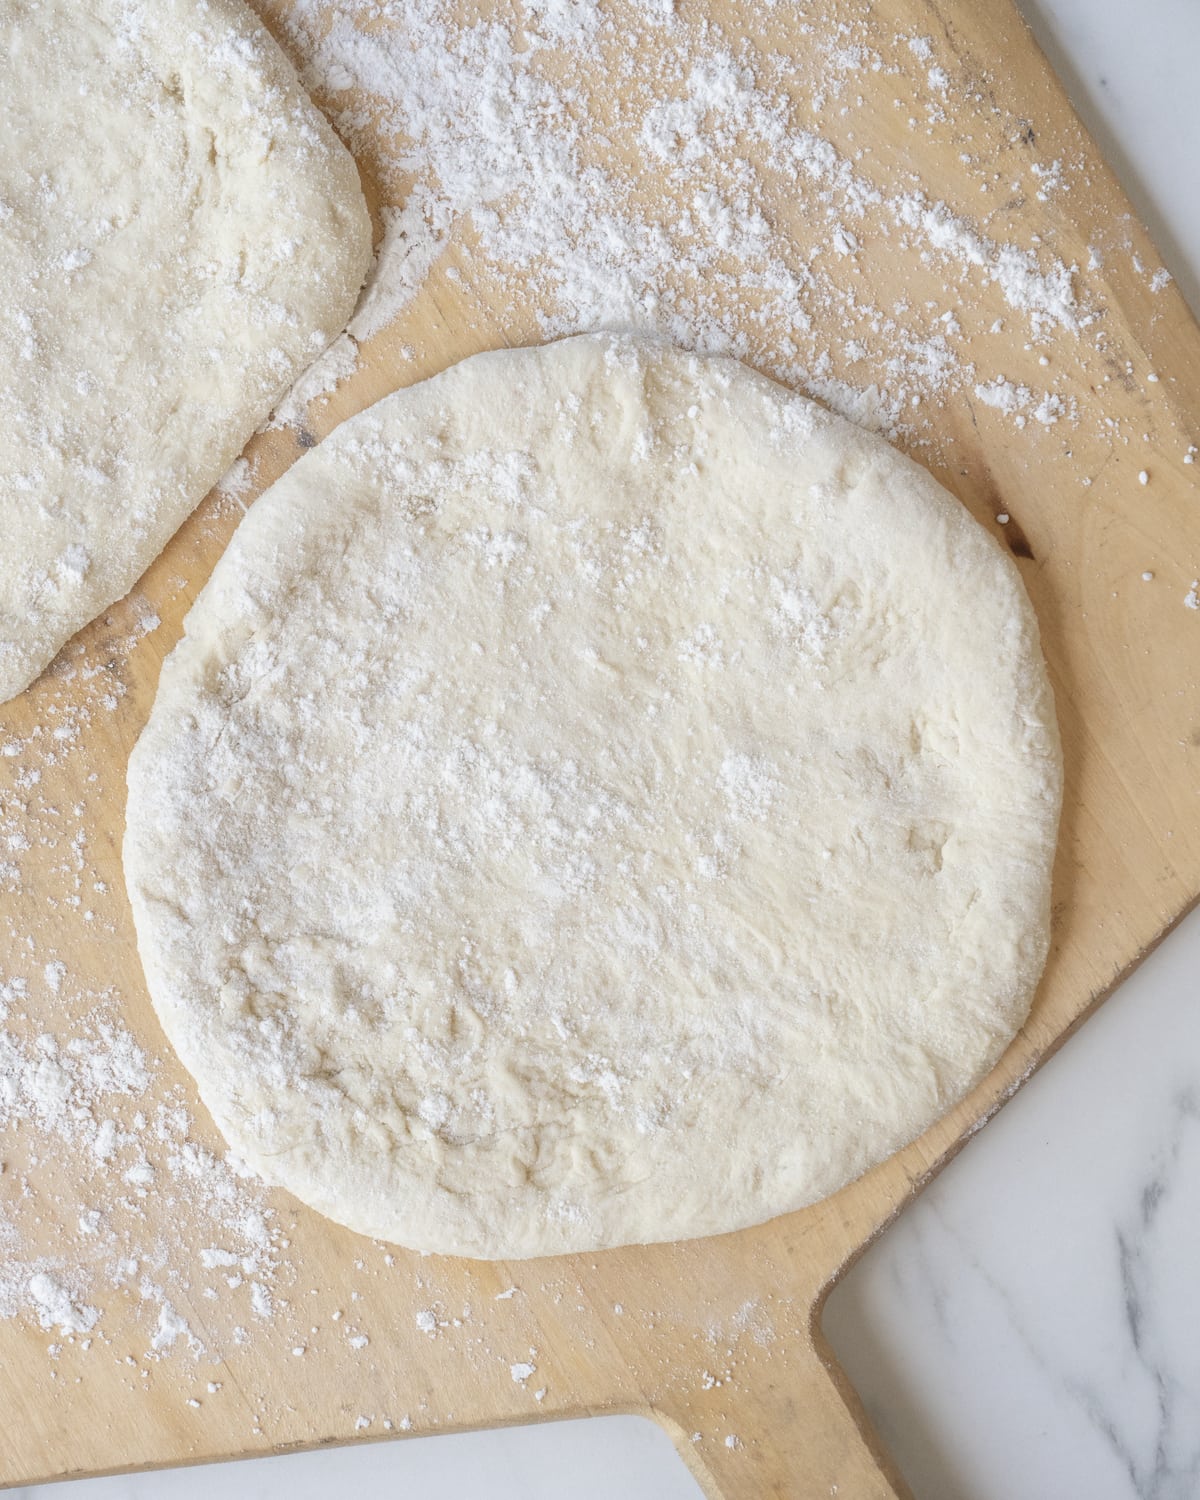 Rolled and shaped pizza dough divided into two pieces on a wooden pizza peel sprinkled with flour